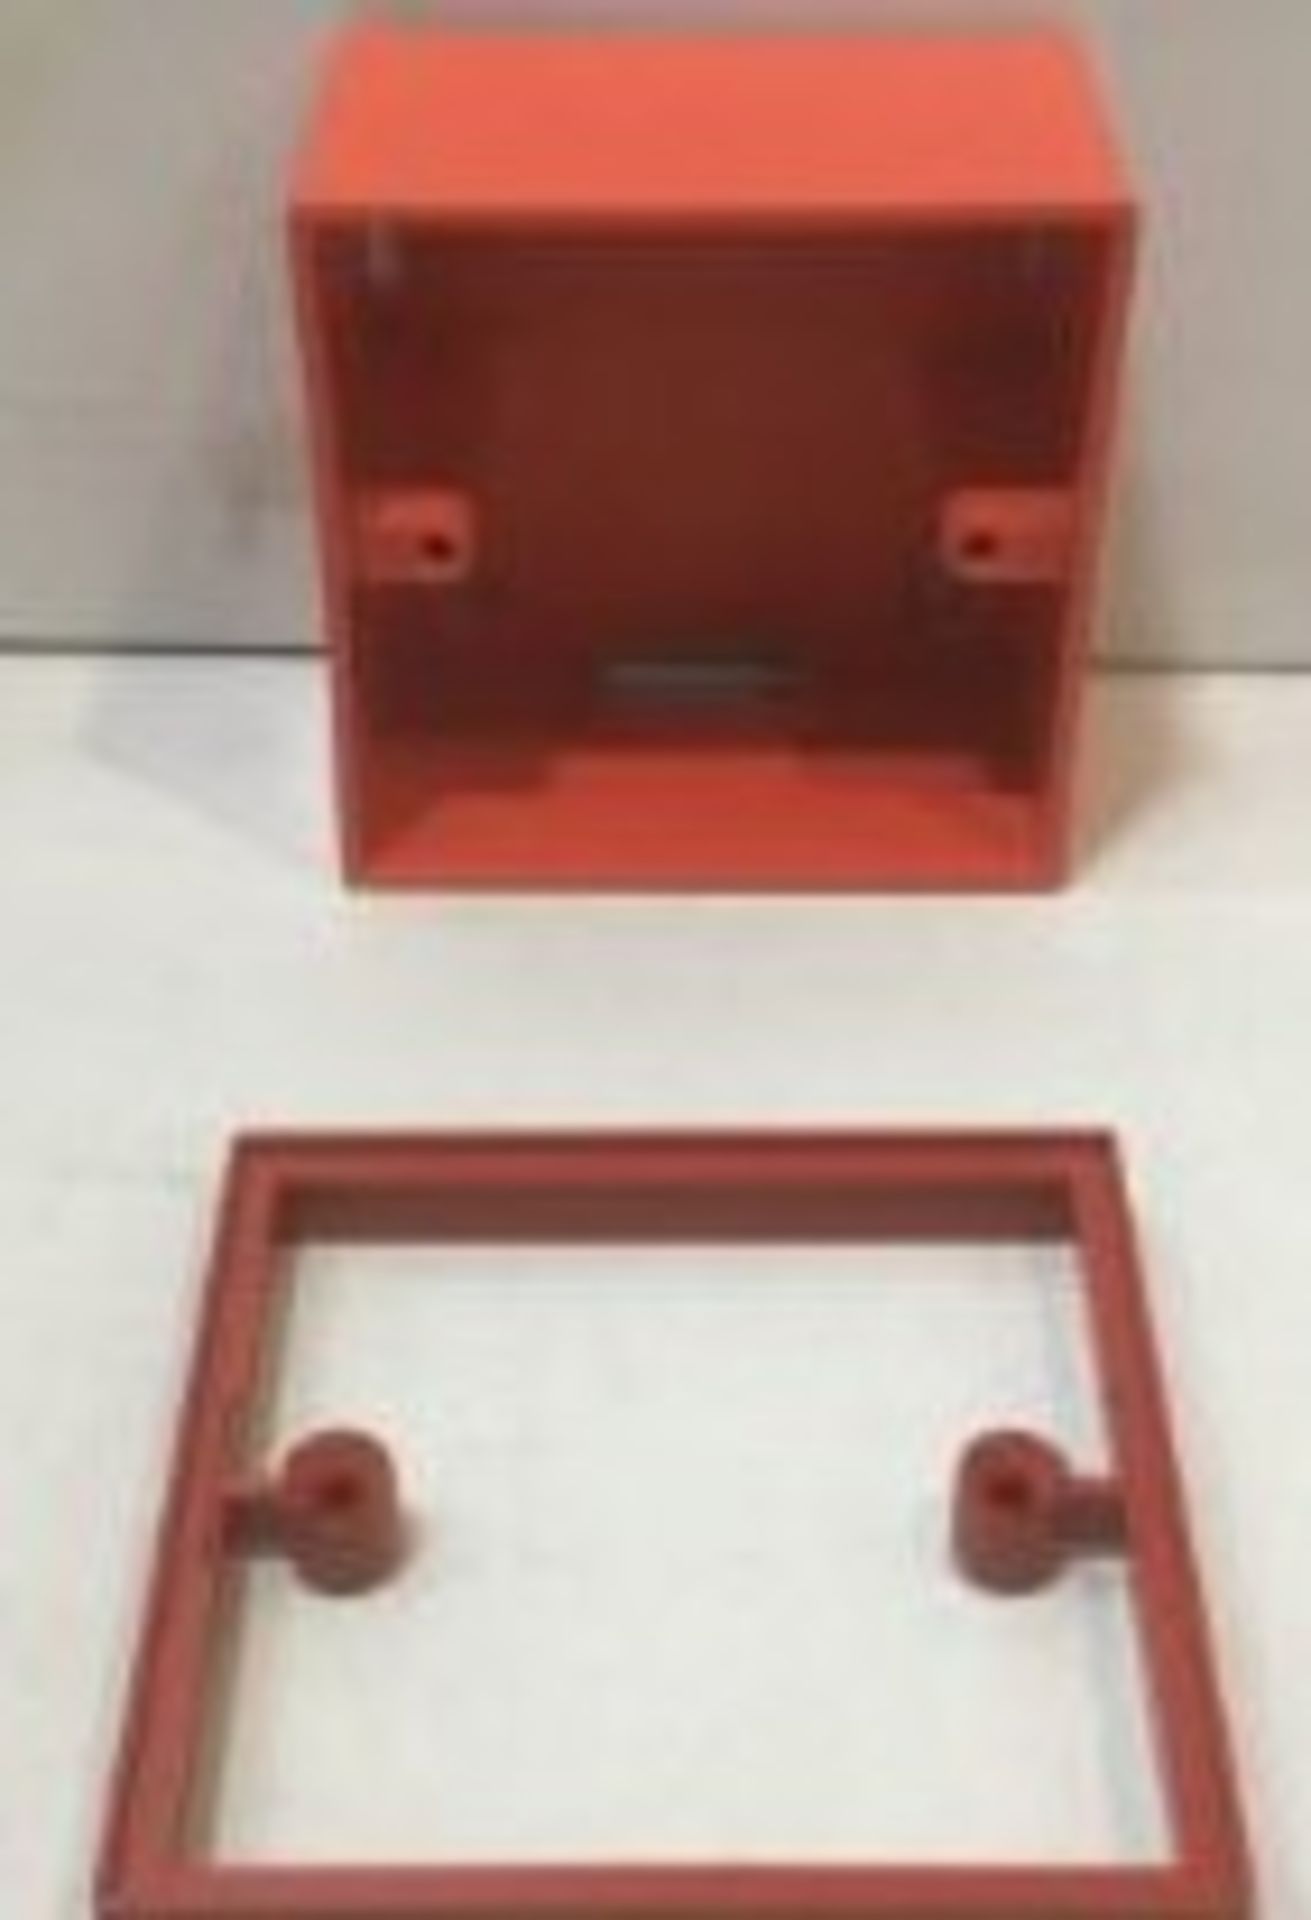 18 x Red Plastic Electrical Wall Boxes W/ 20 x Spacer Pieces - Image 2 of 4